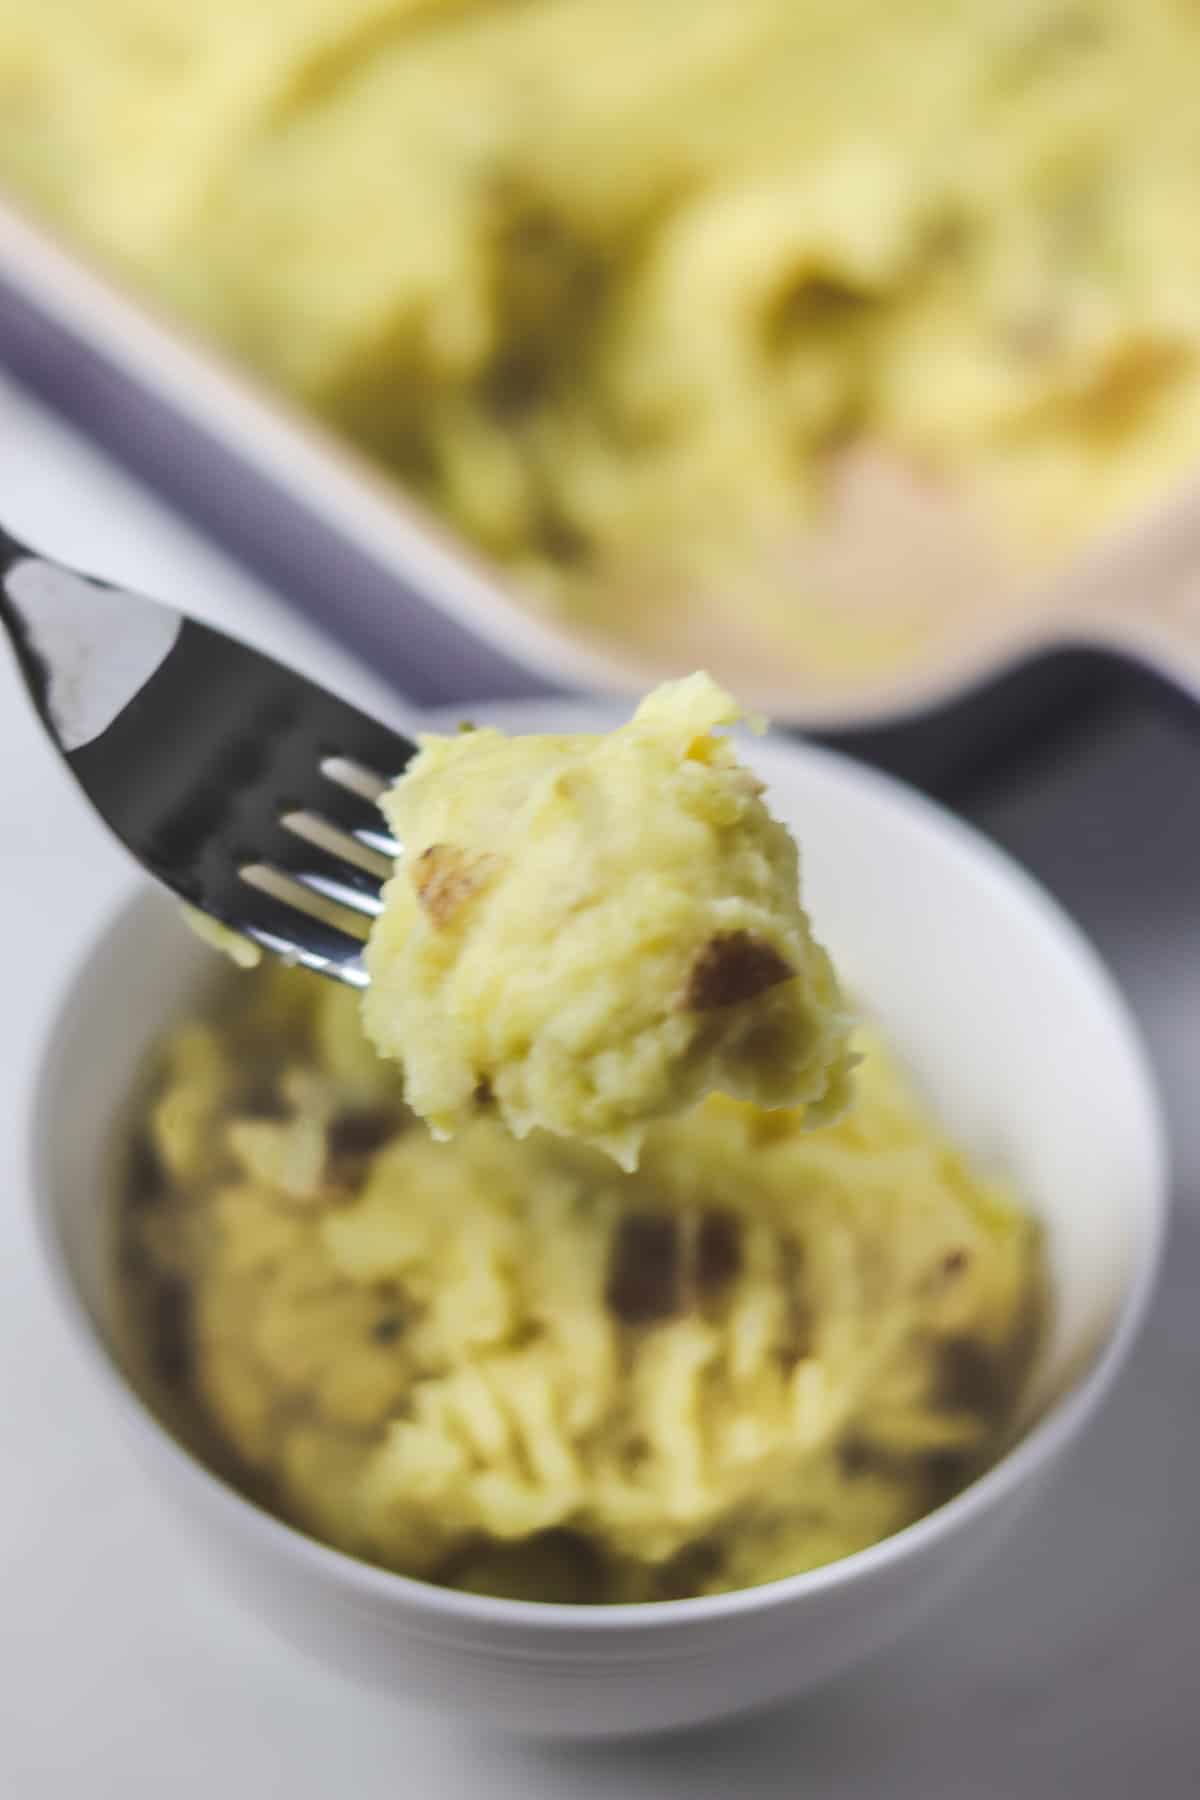 taking a bite out of a bowl of mashed potatoes